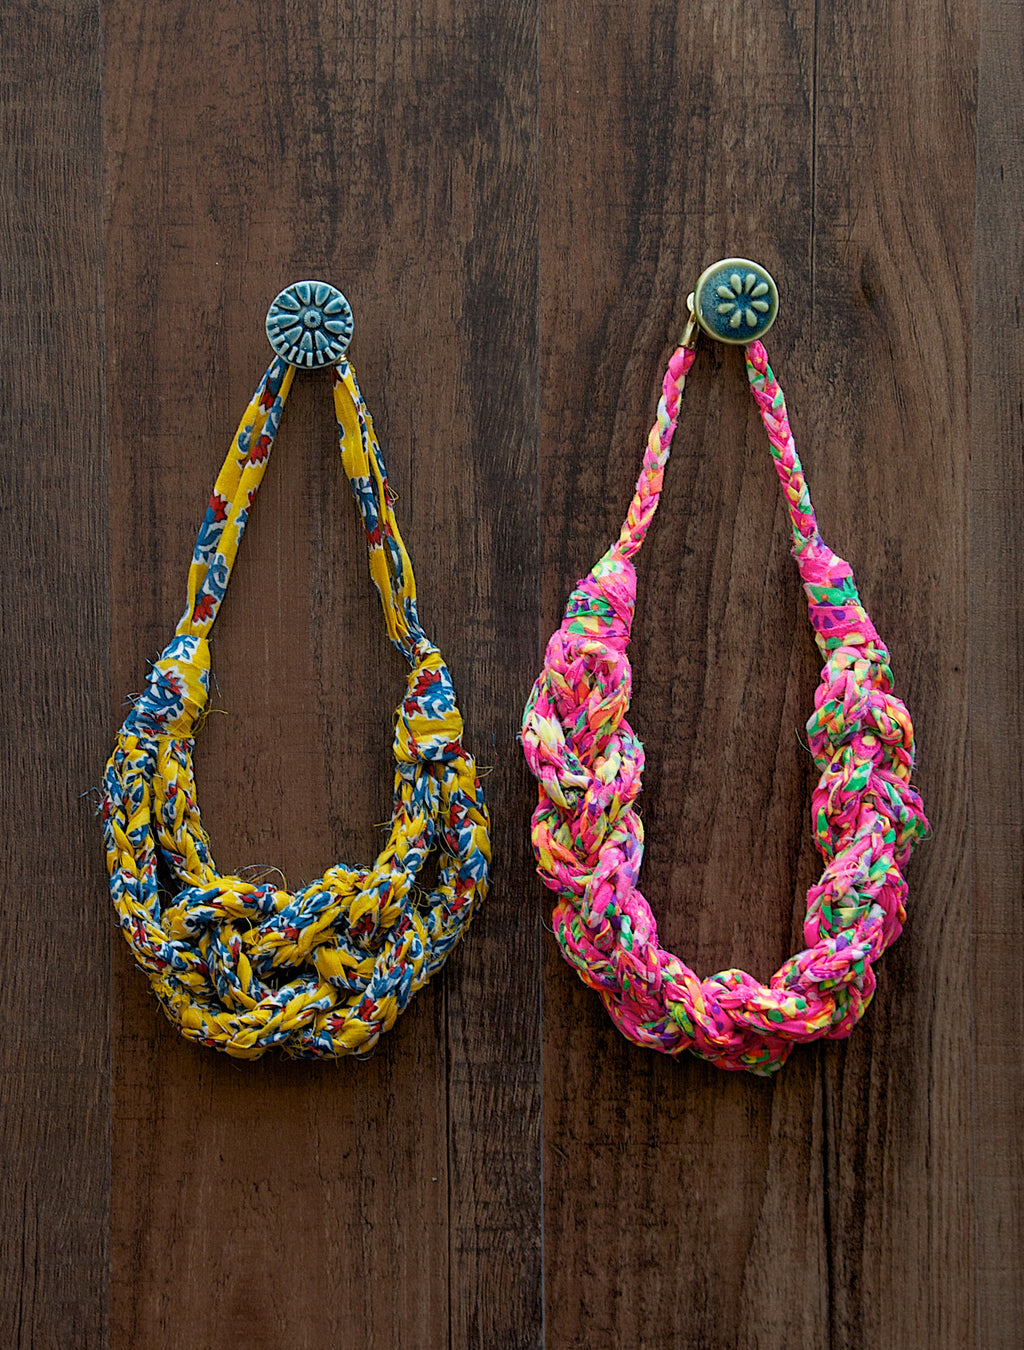 Knit Collage Wildflower Sailor Necklaces Knitting Pattern